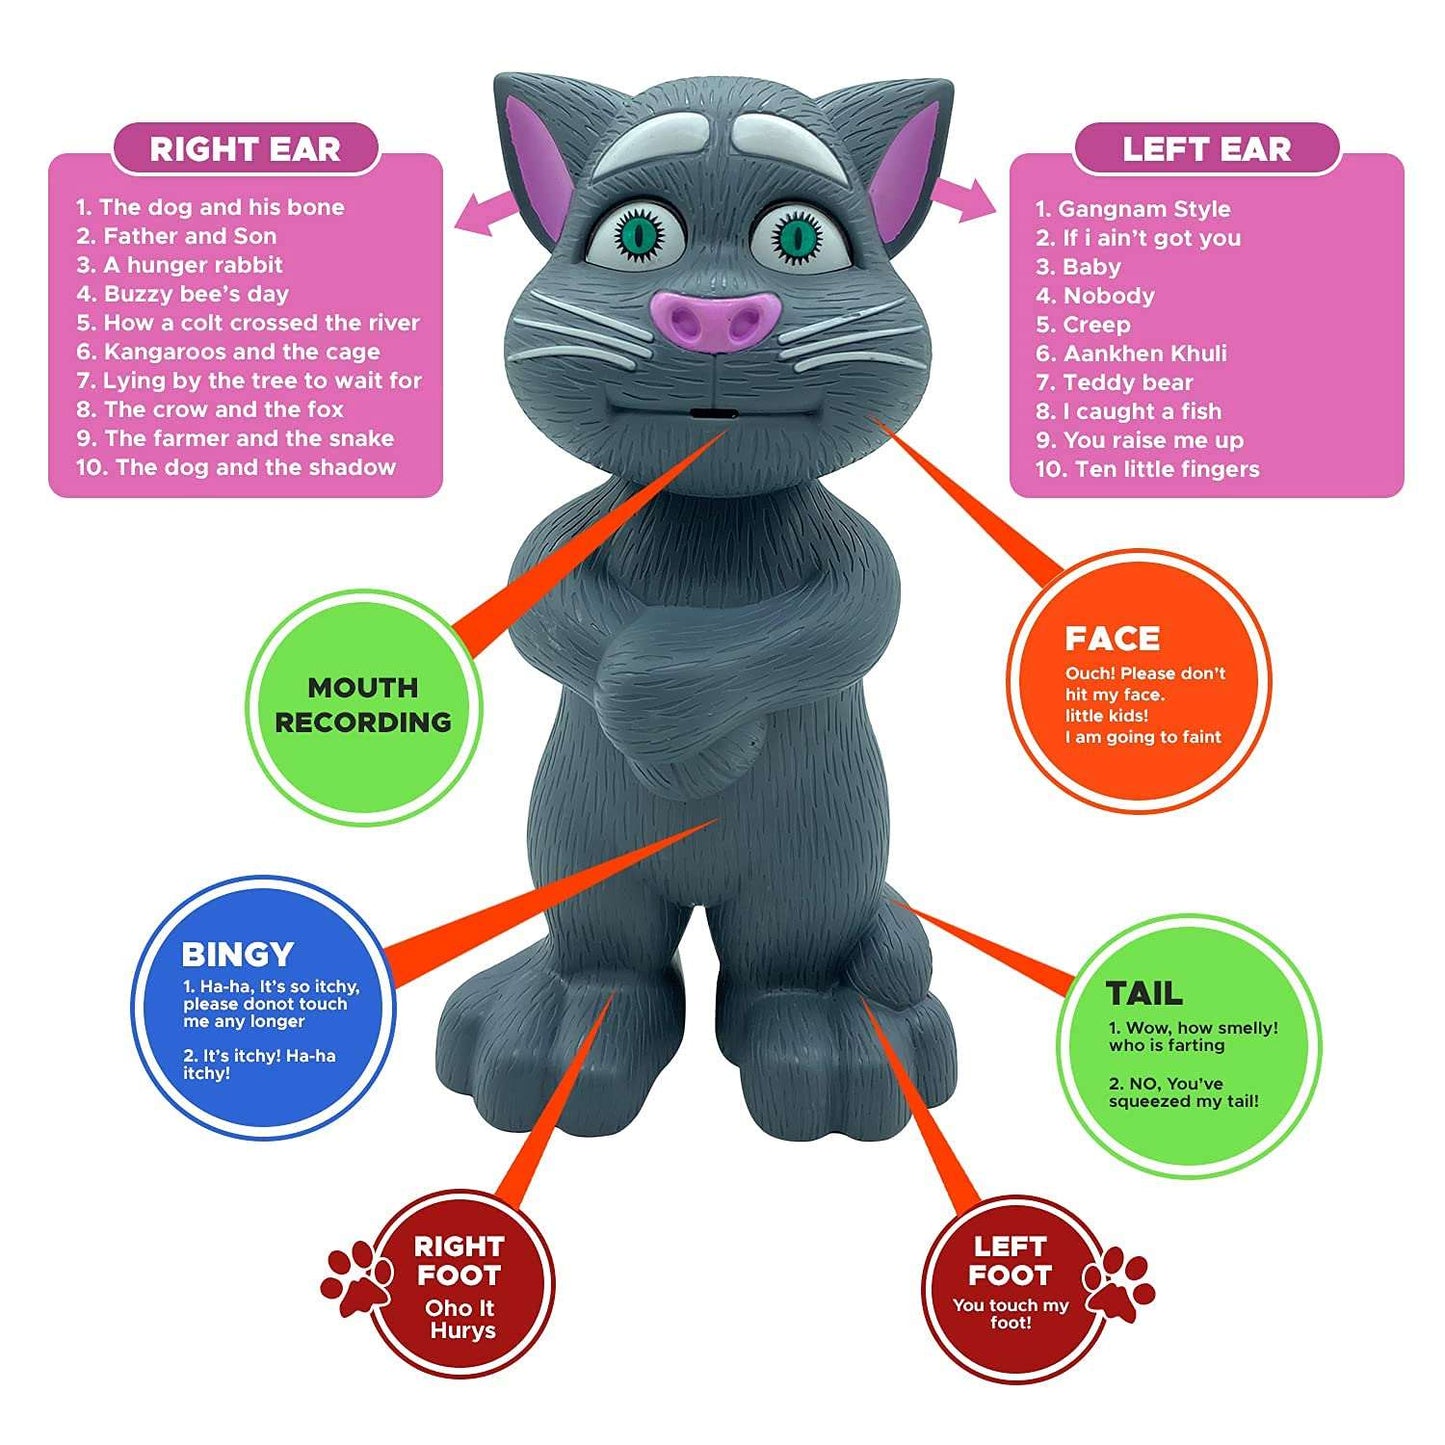 AZi® AI Touching Talking Tom Toy. Intelligent Tom CAT with Touching, Talking & Voice Feature. Talking Cat Come with Stories and Touch Functions, Musical Cat Toy, Grey Color